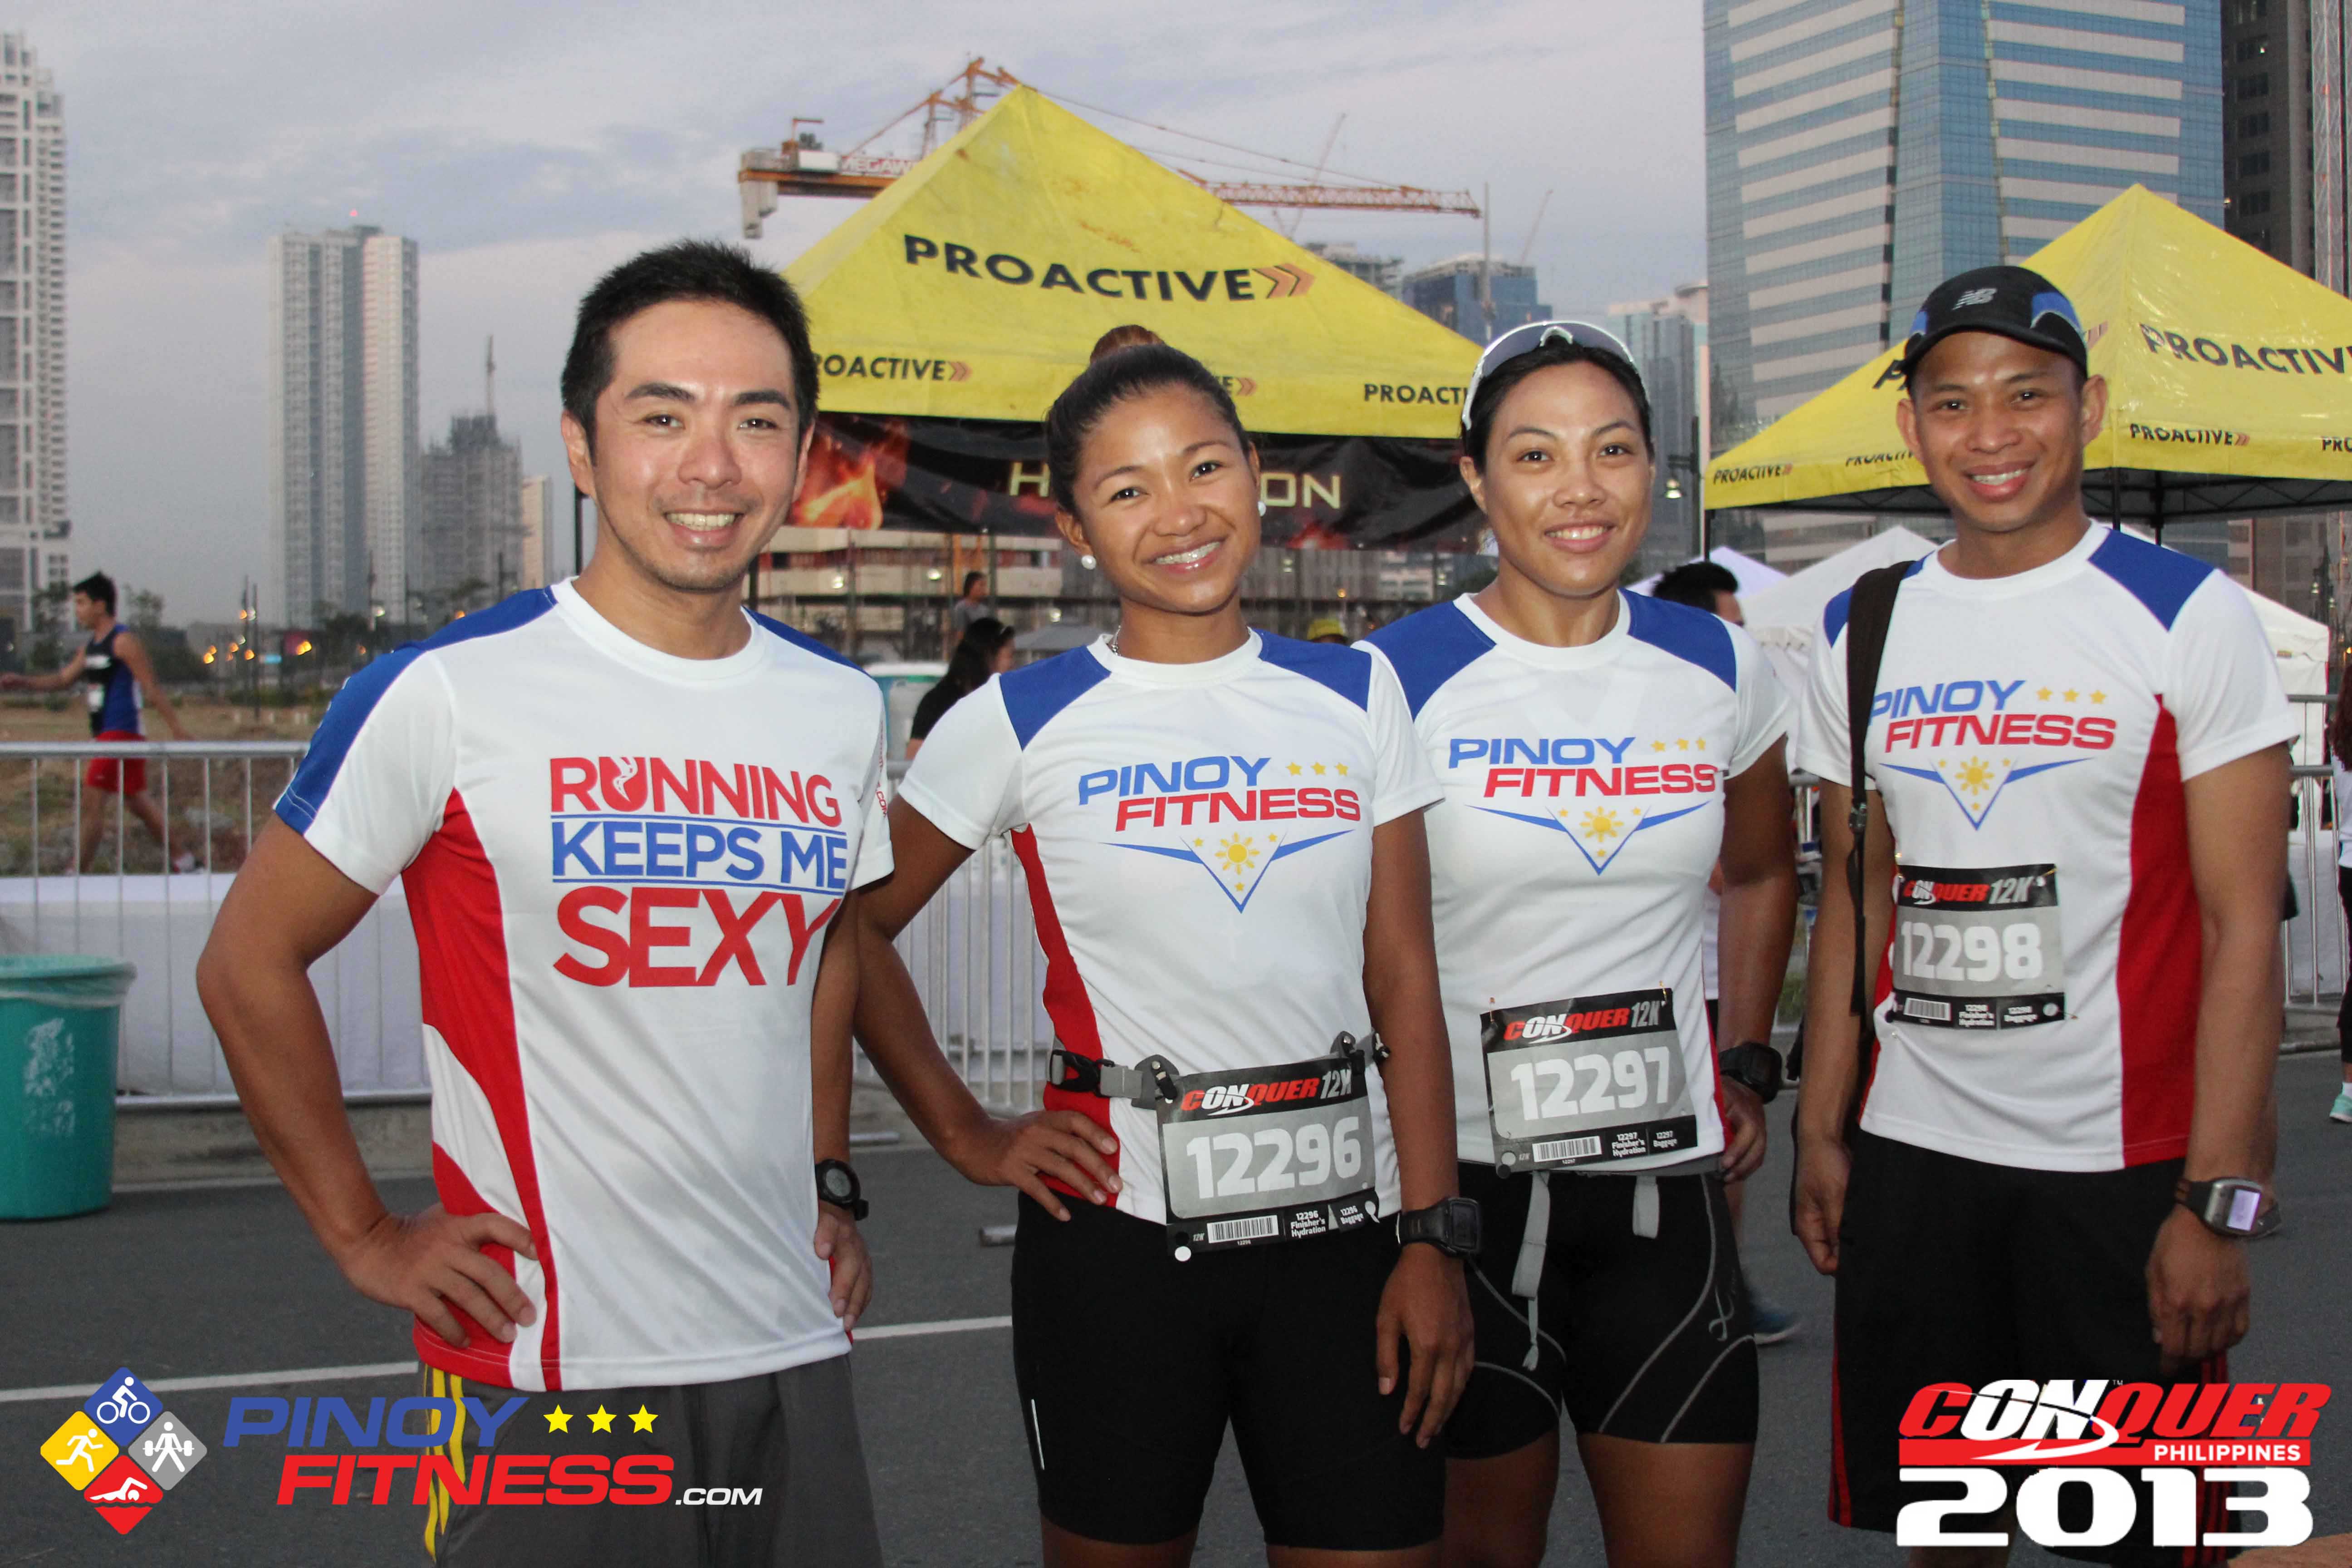 Conquer Philippines 2013 | Pinoy Fitness